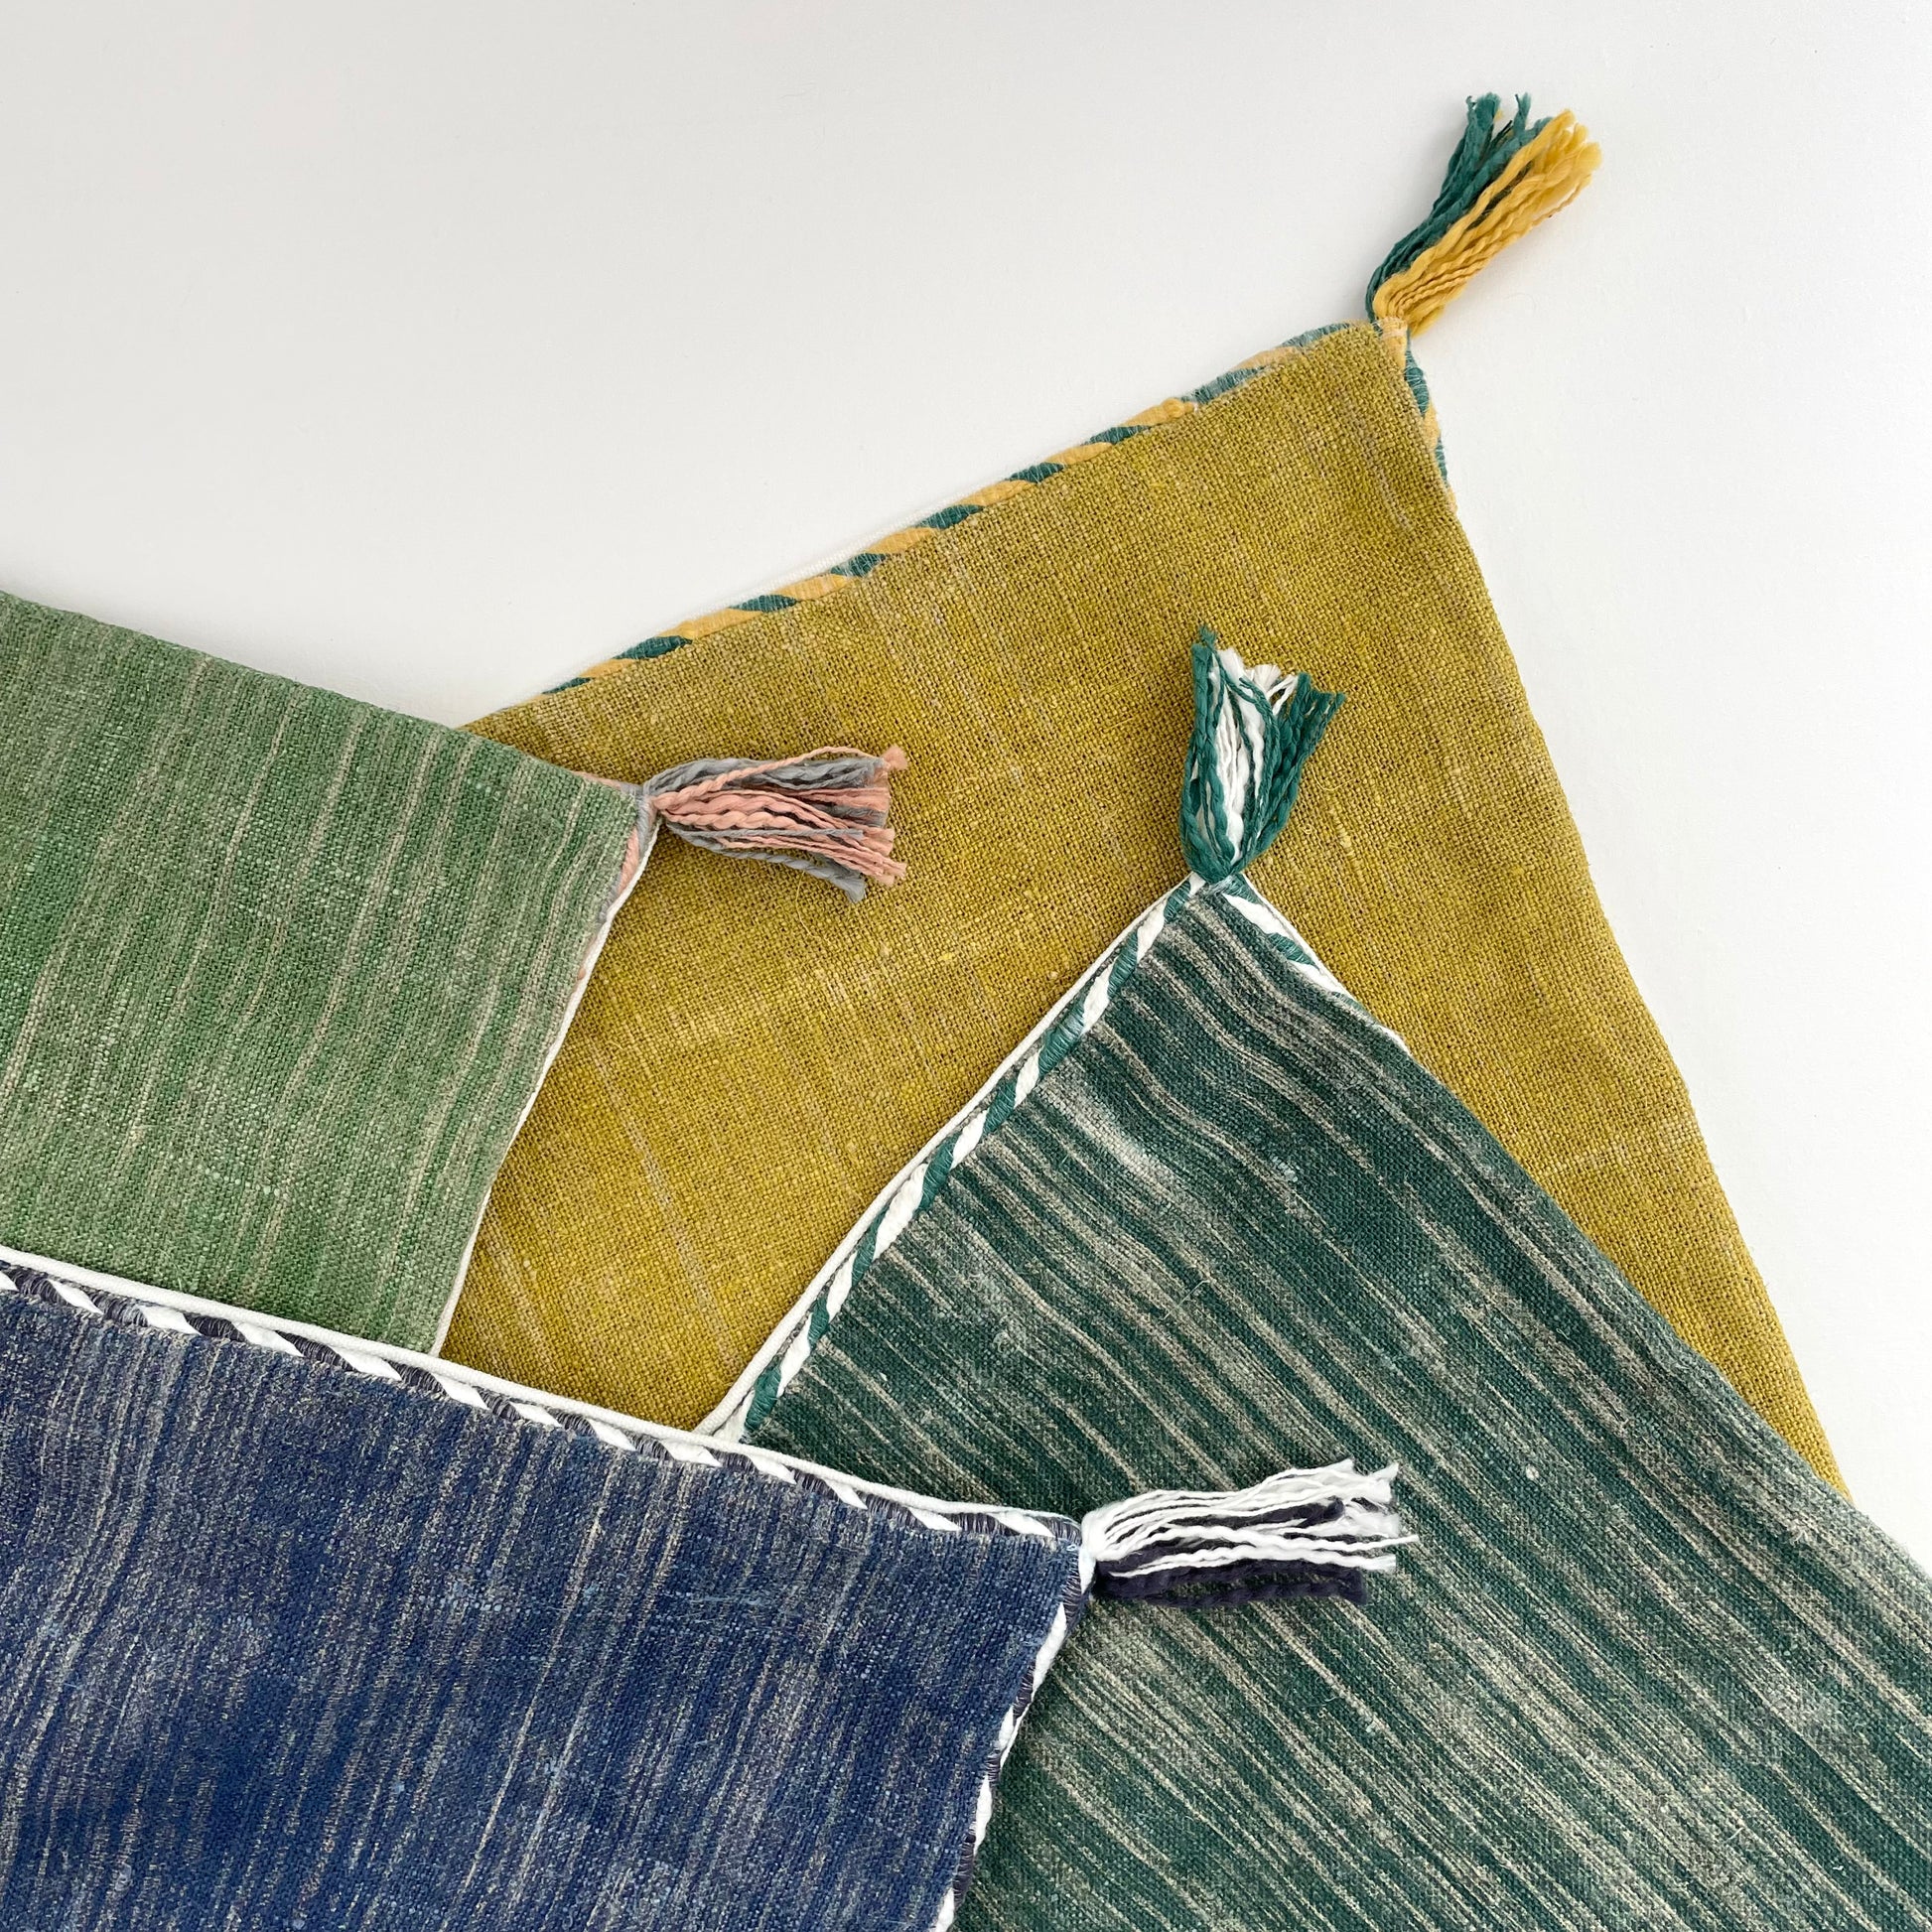 linen pillow covers in mustard, blue, and green with striped edging and tassels